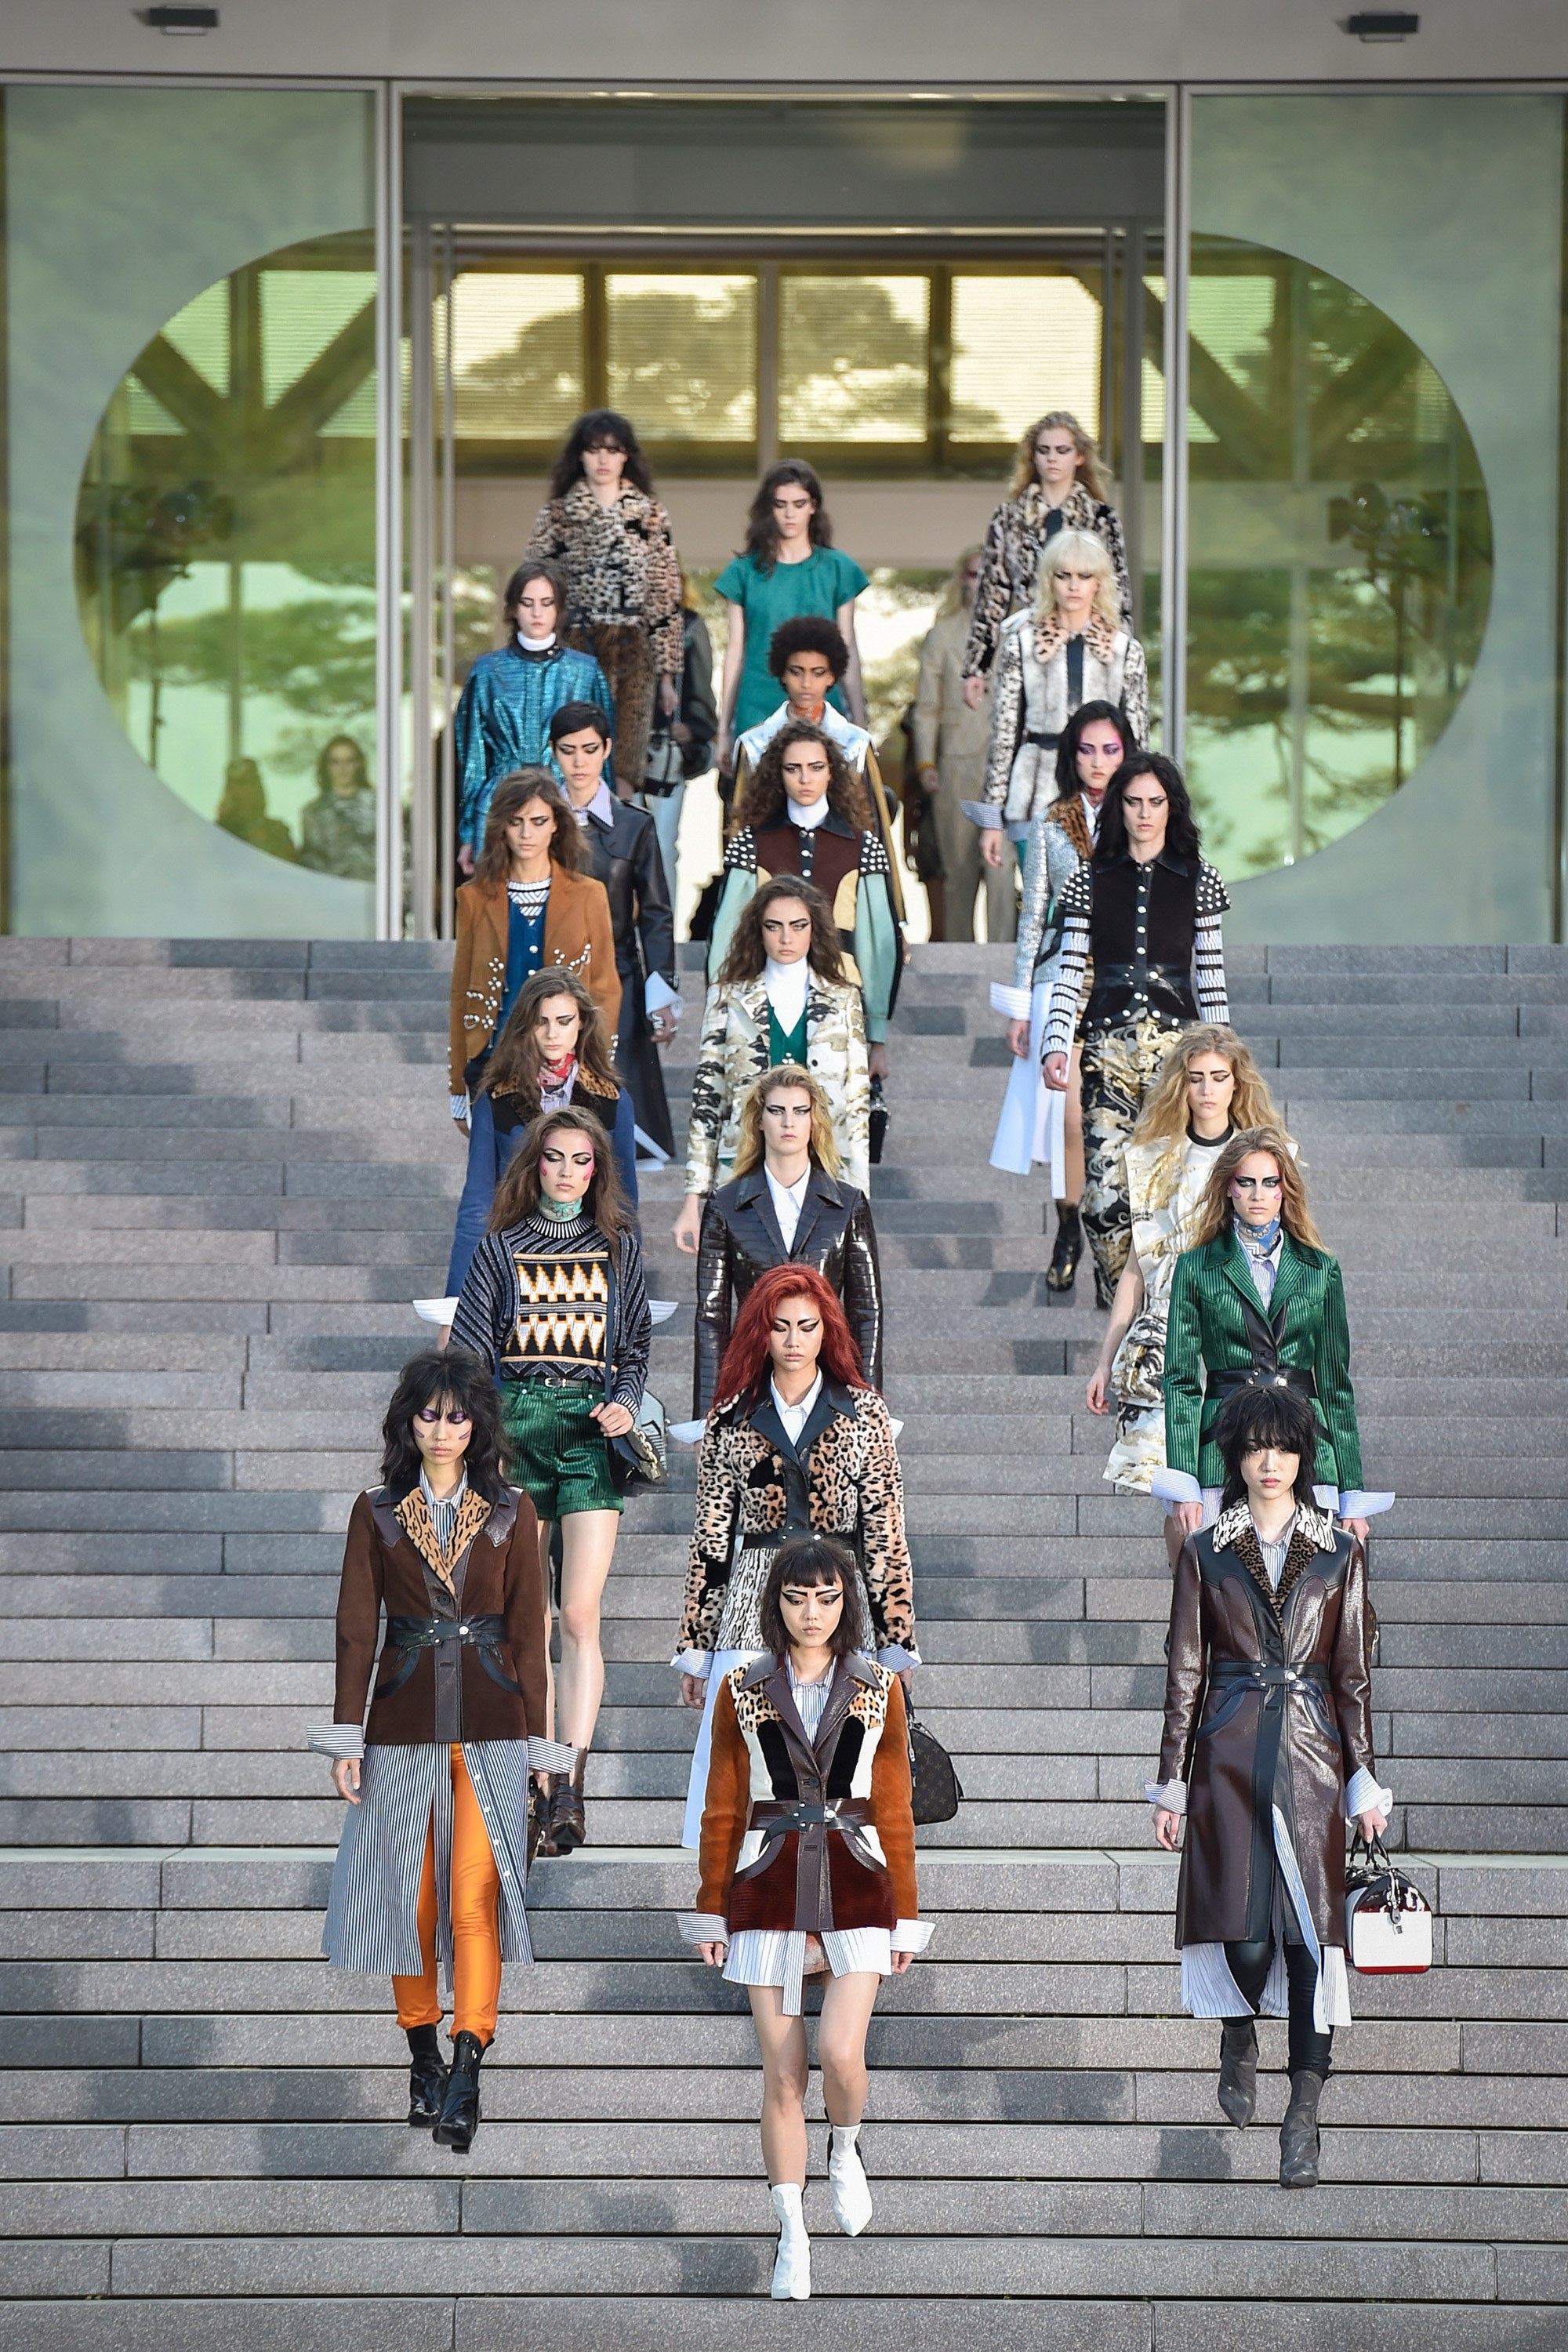 Louis Vuitton Cruise 2018 Show in Kyoto, Japan: Celebrity Pictures